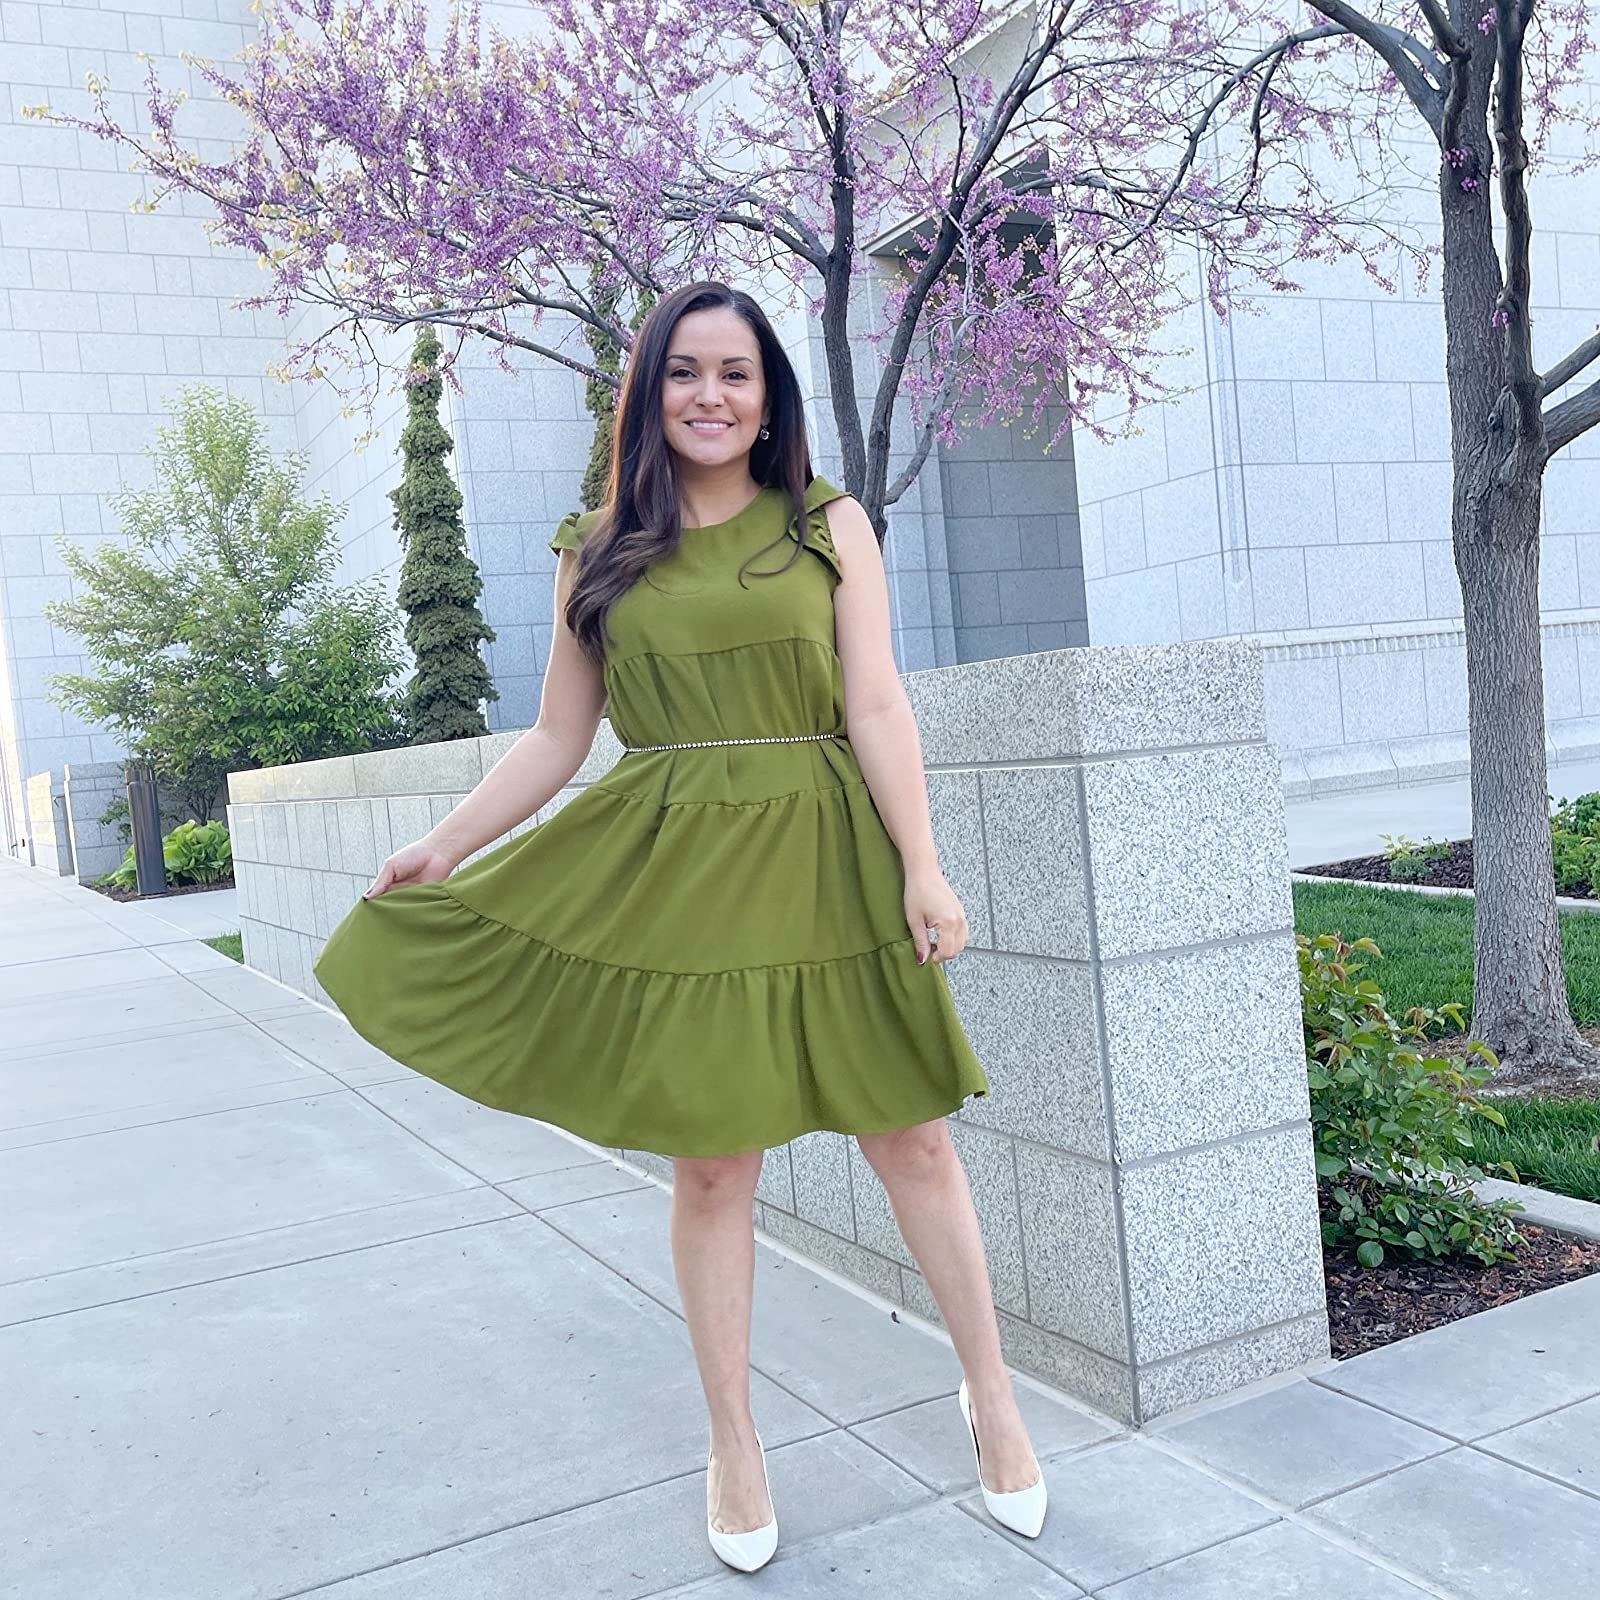 A reviewer photo of the dress in green